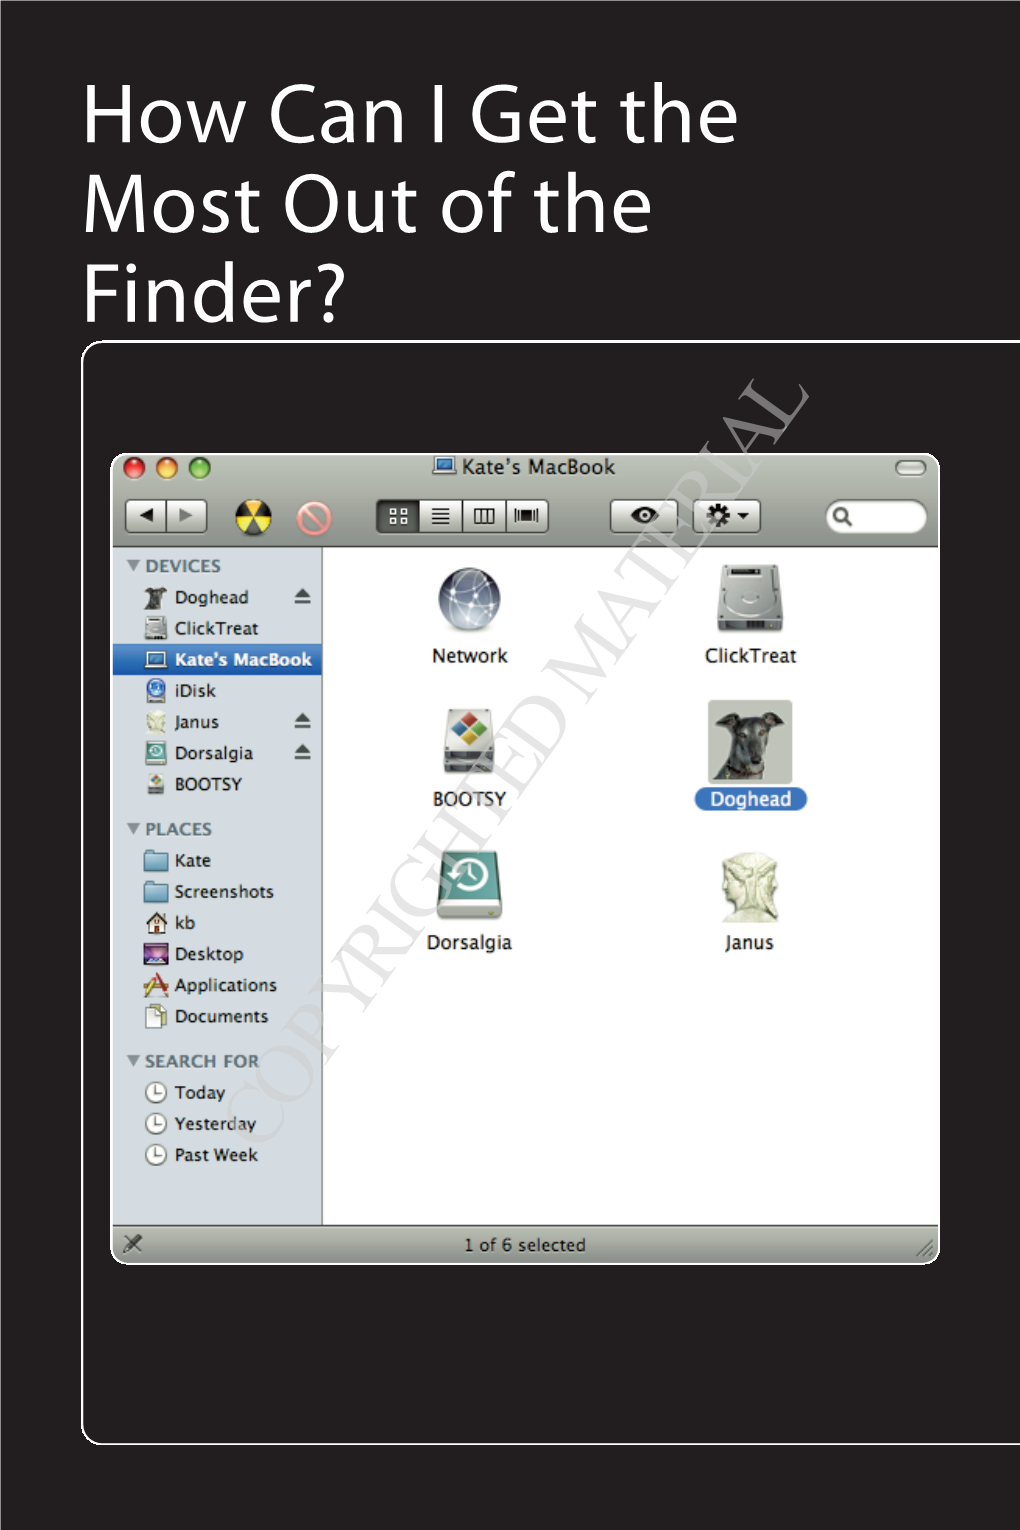 How Can I Get the Most out of the Finder?